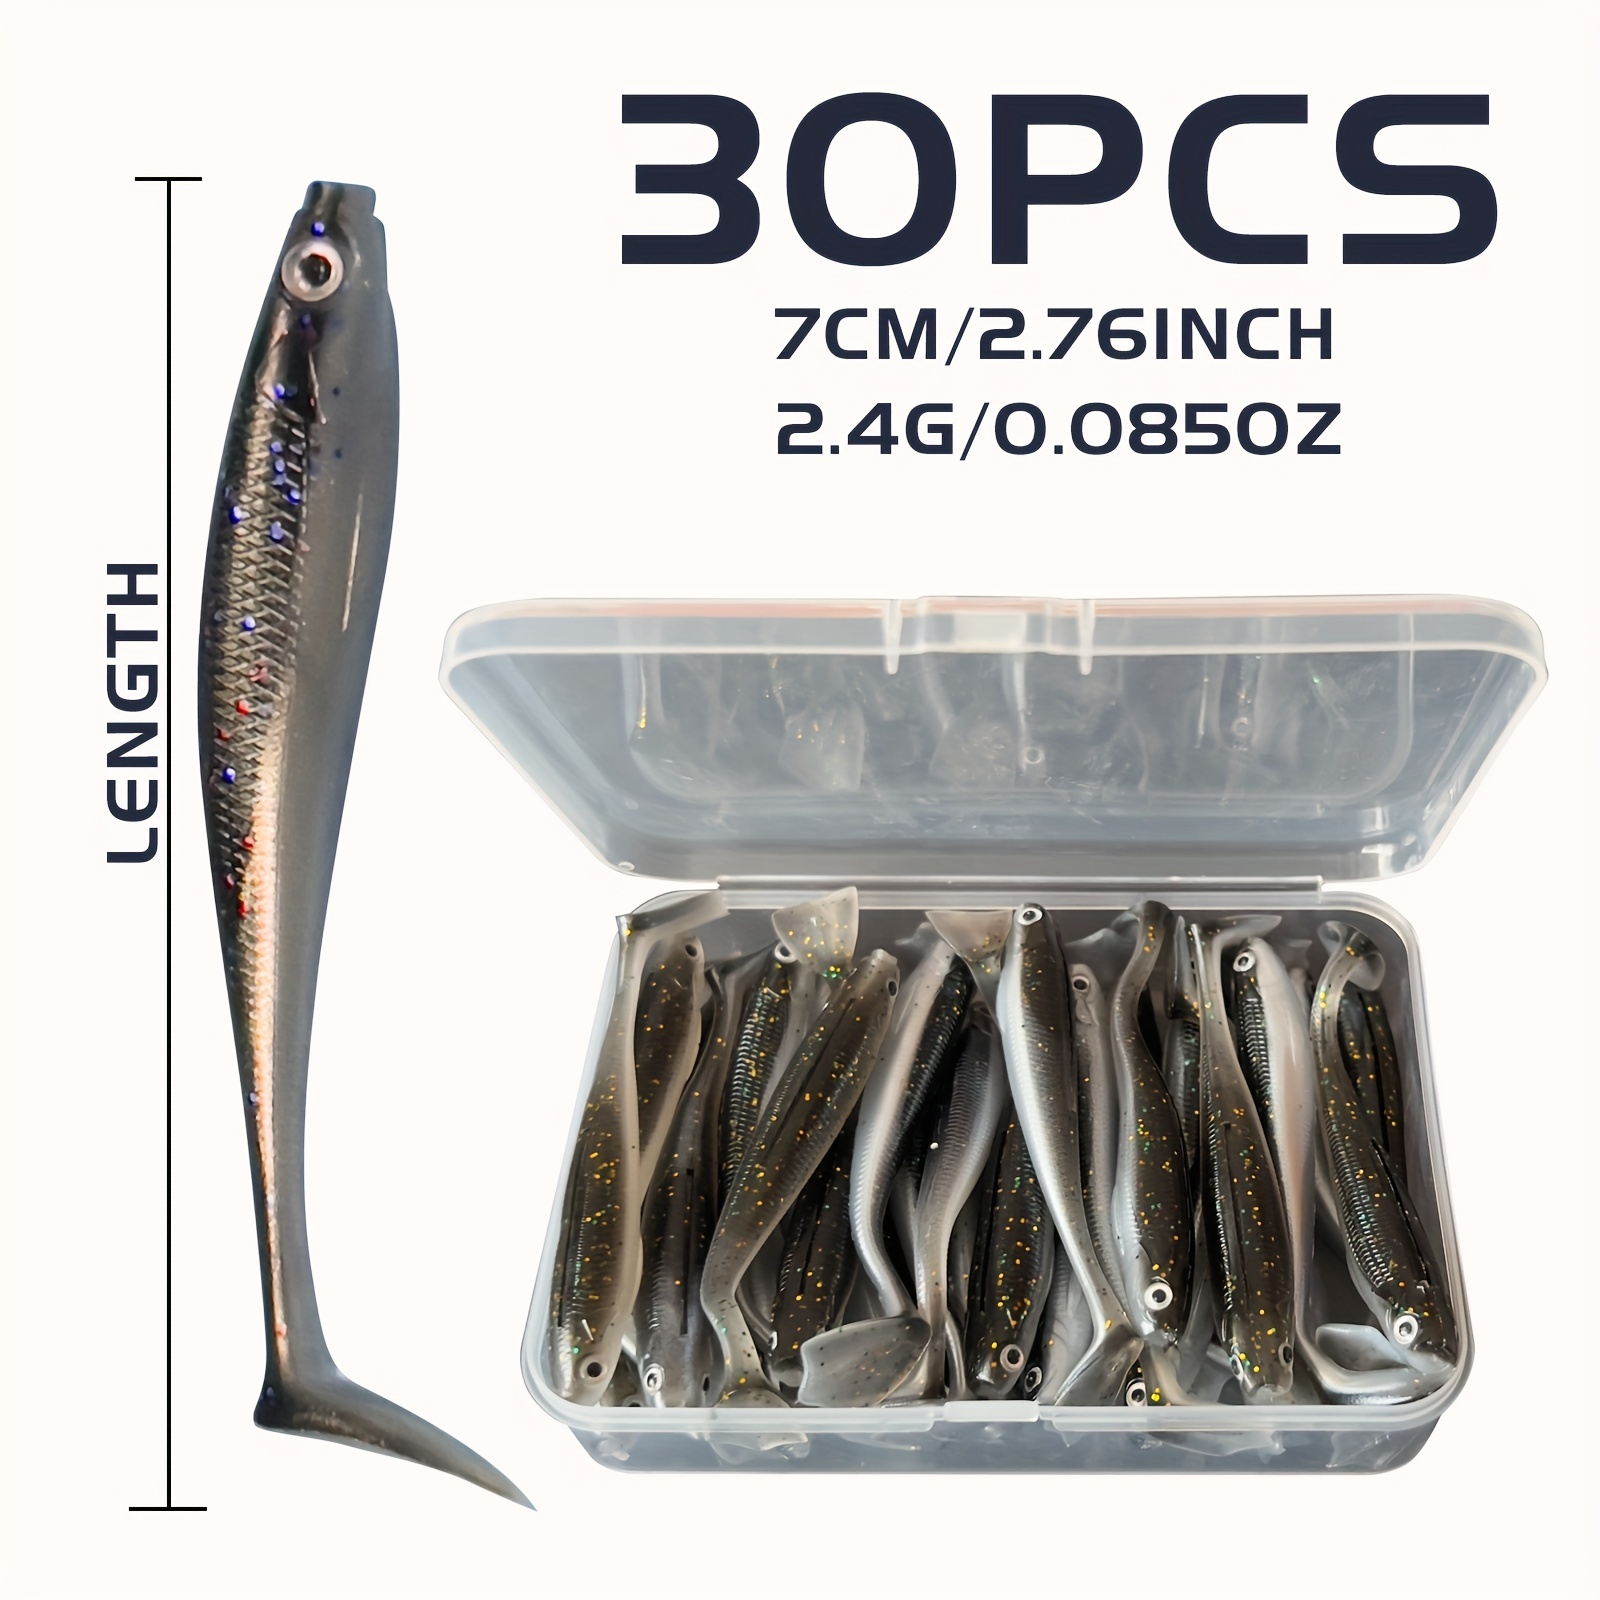 

30pcs Paddle Tail Soft Fishing Lures - Bionic Swimbait For Perch, Catfish, And - Artificial Bait With Lifelike Action